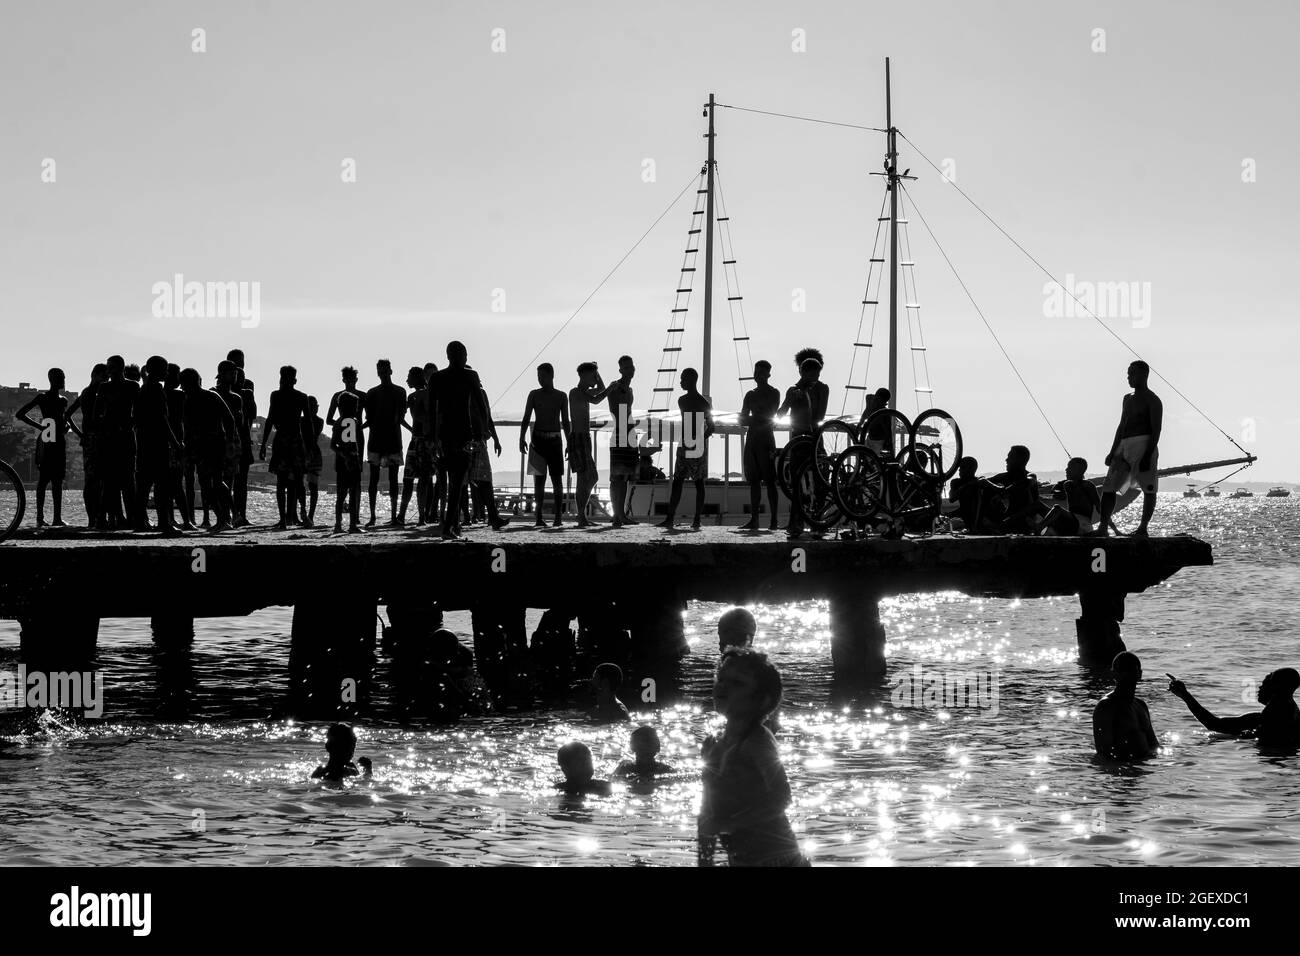 Salvador, Bahia, Brazil - March 09 2019: Silhouette of young people jumping from the Crush bridge at the yellow sunset on Ribeira beach in Salvador (B Stock Photo